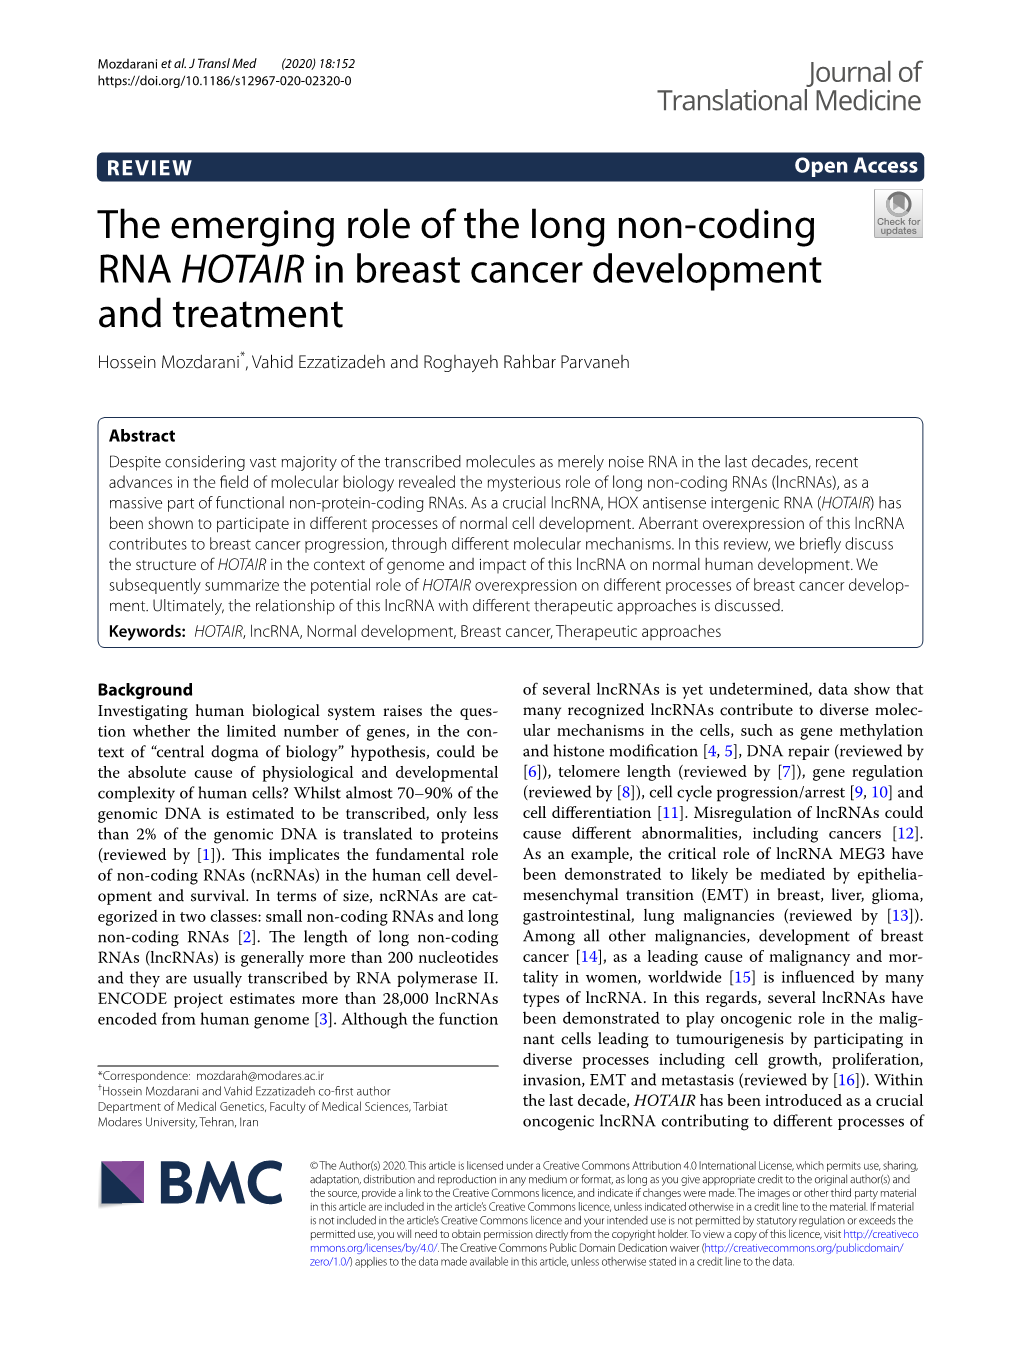 The Emerging Role of the Long Non-Coding RNA HOTAIR in Breast